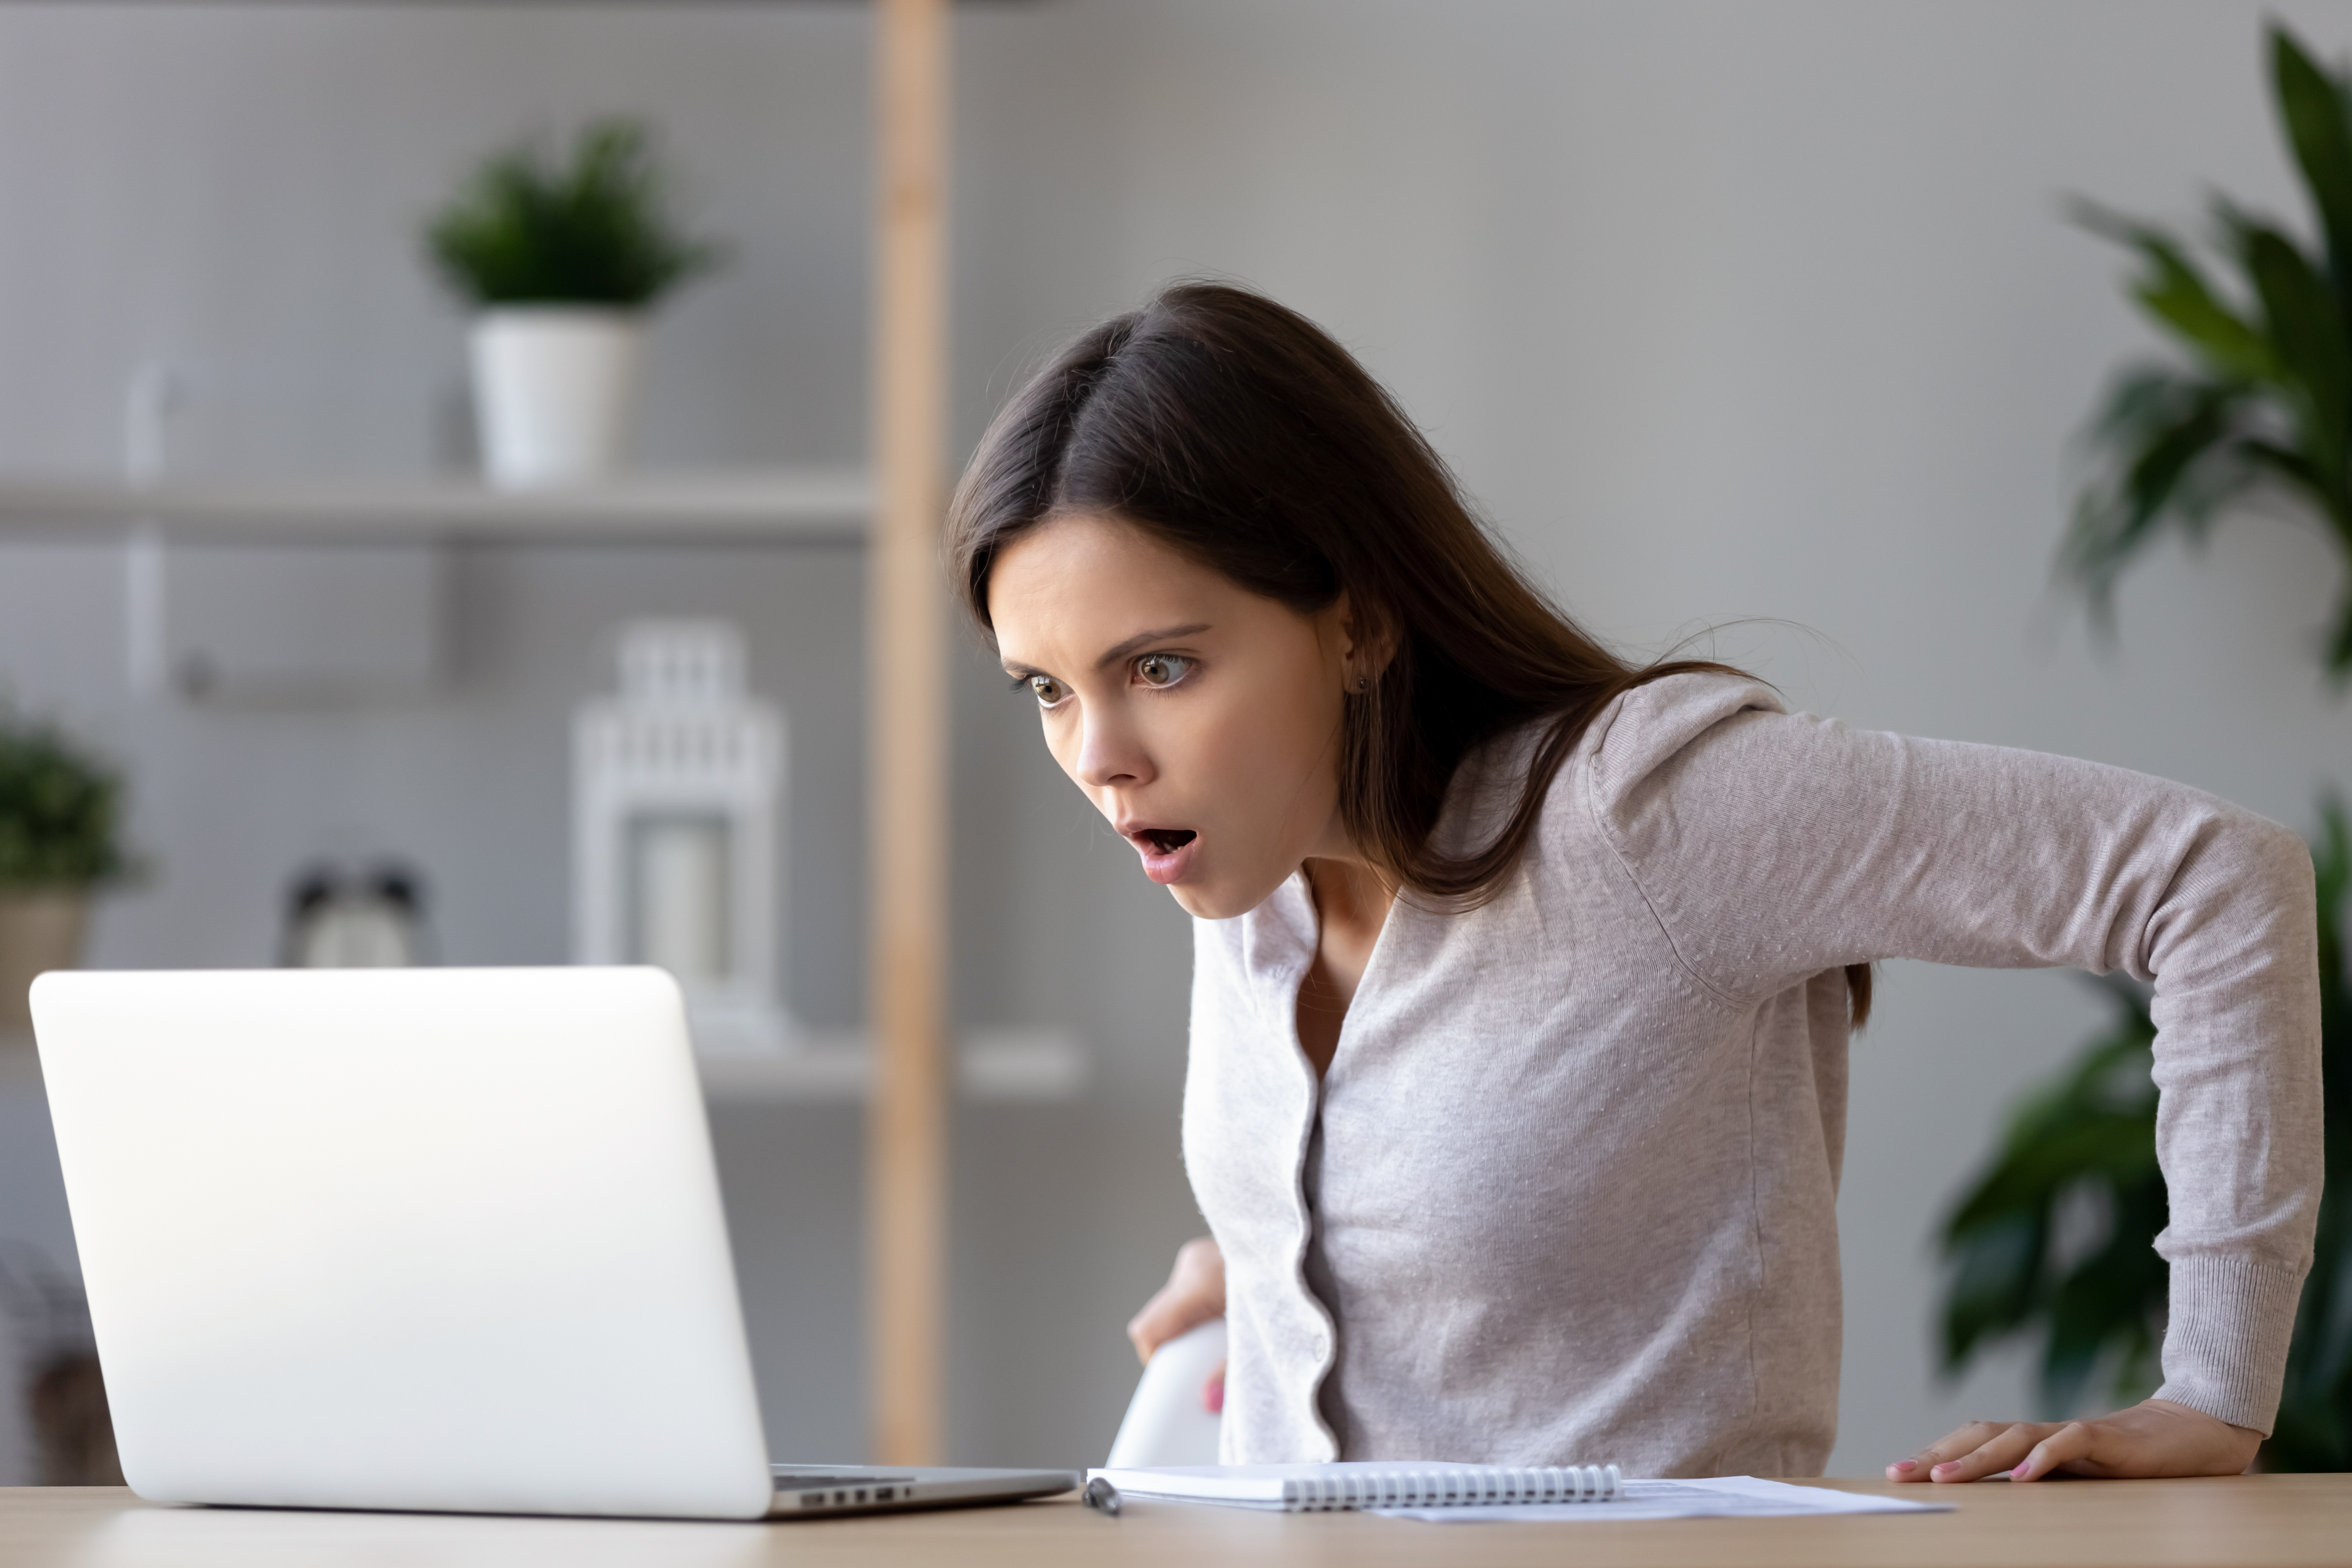 A  young woman looking shocked at what she's seeing in a laptop | Source: Shutterstock